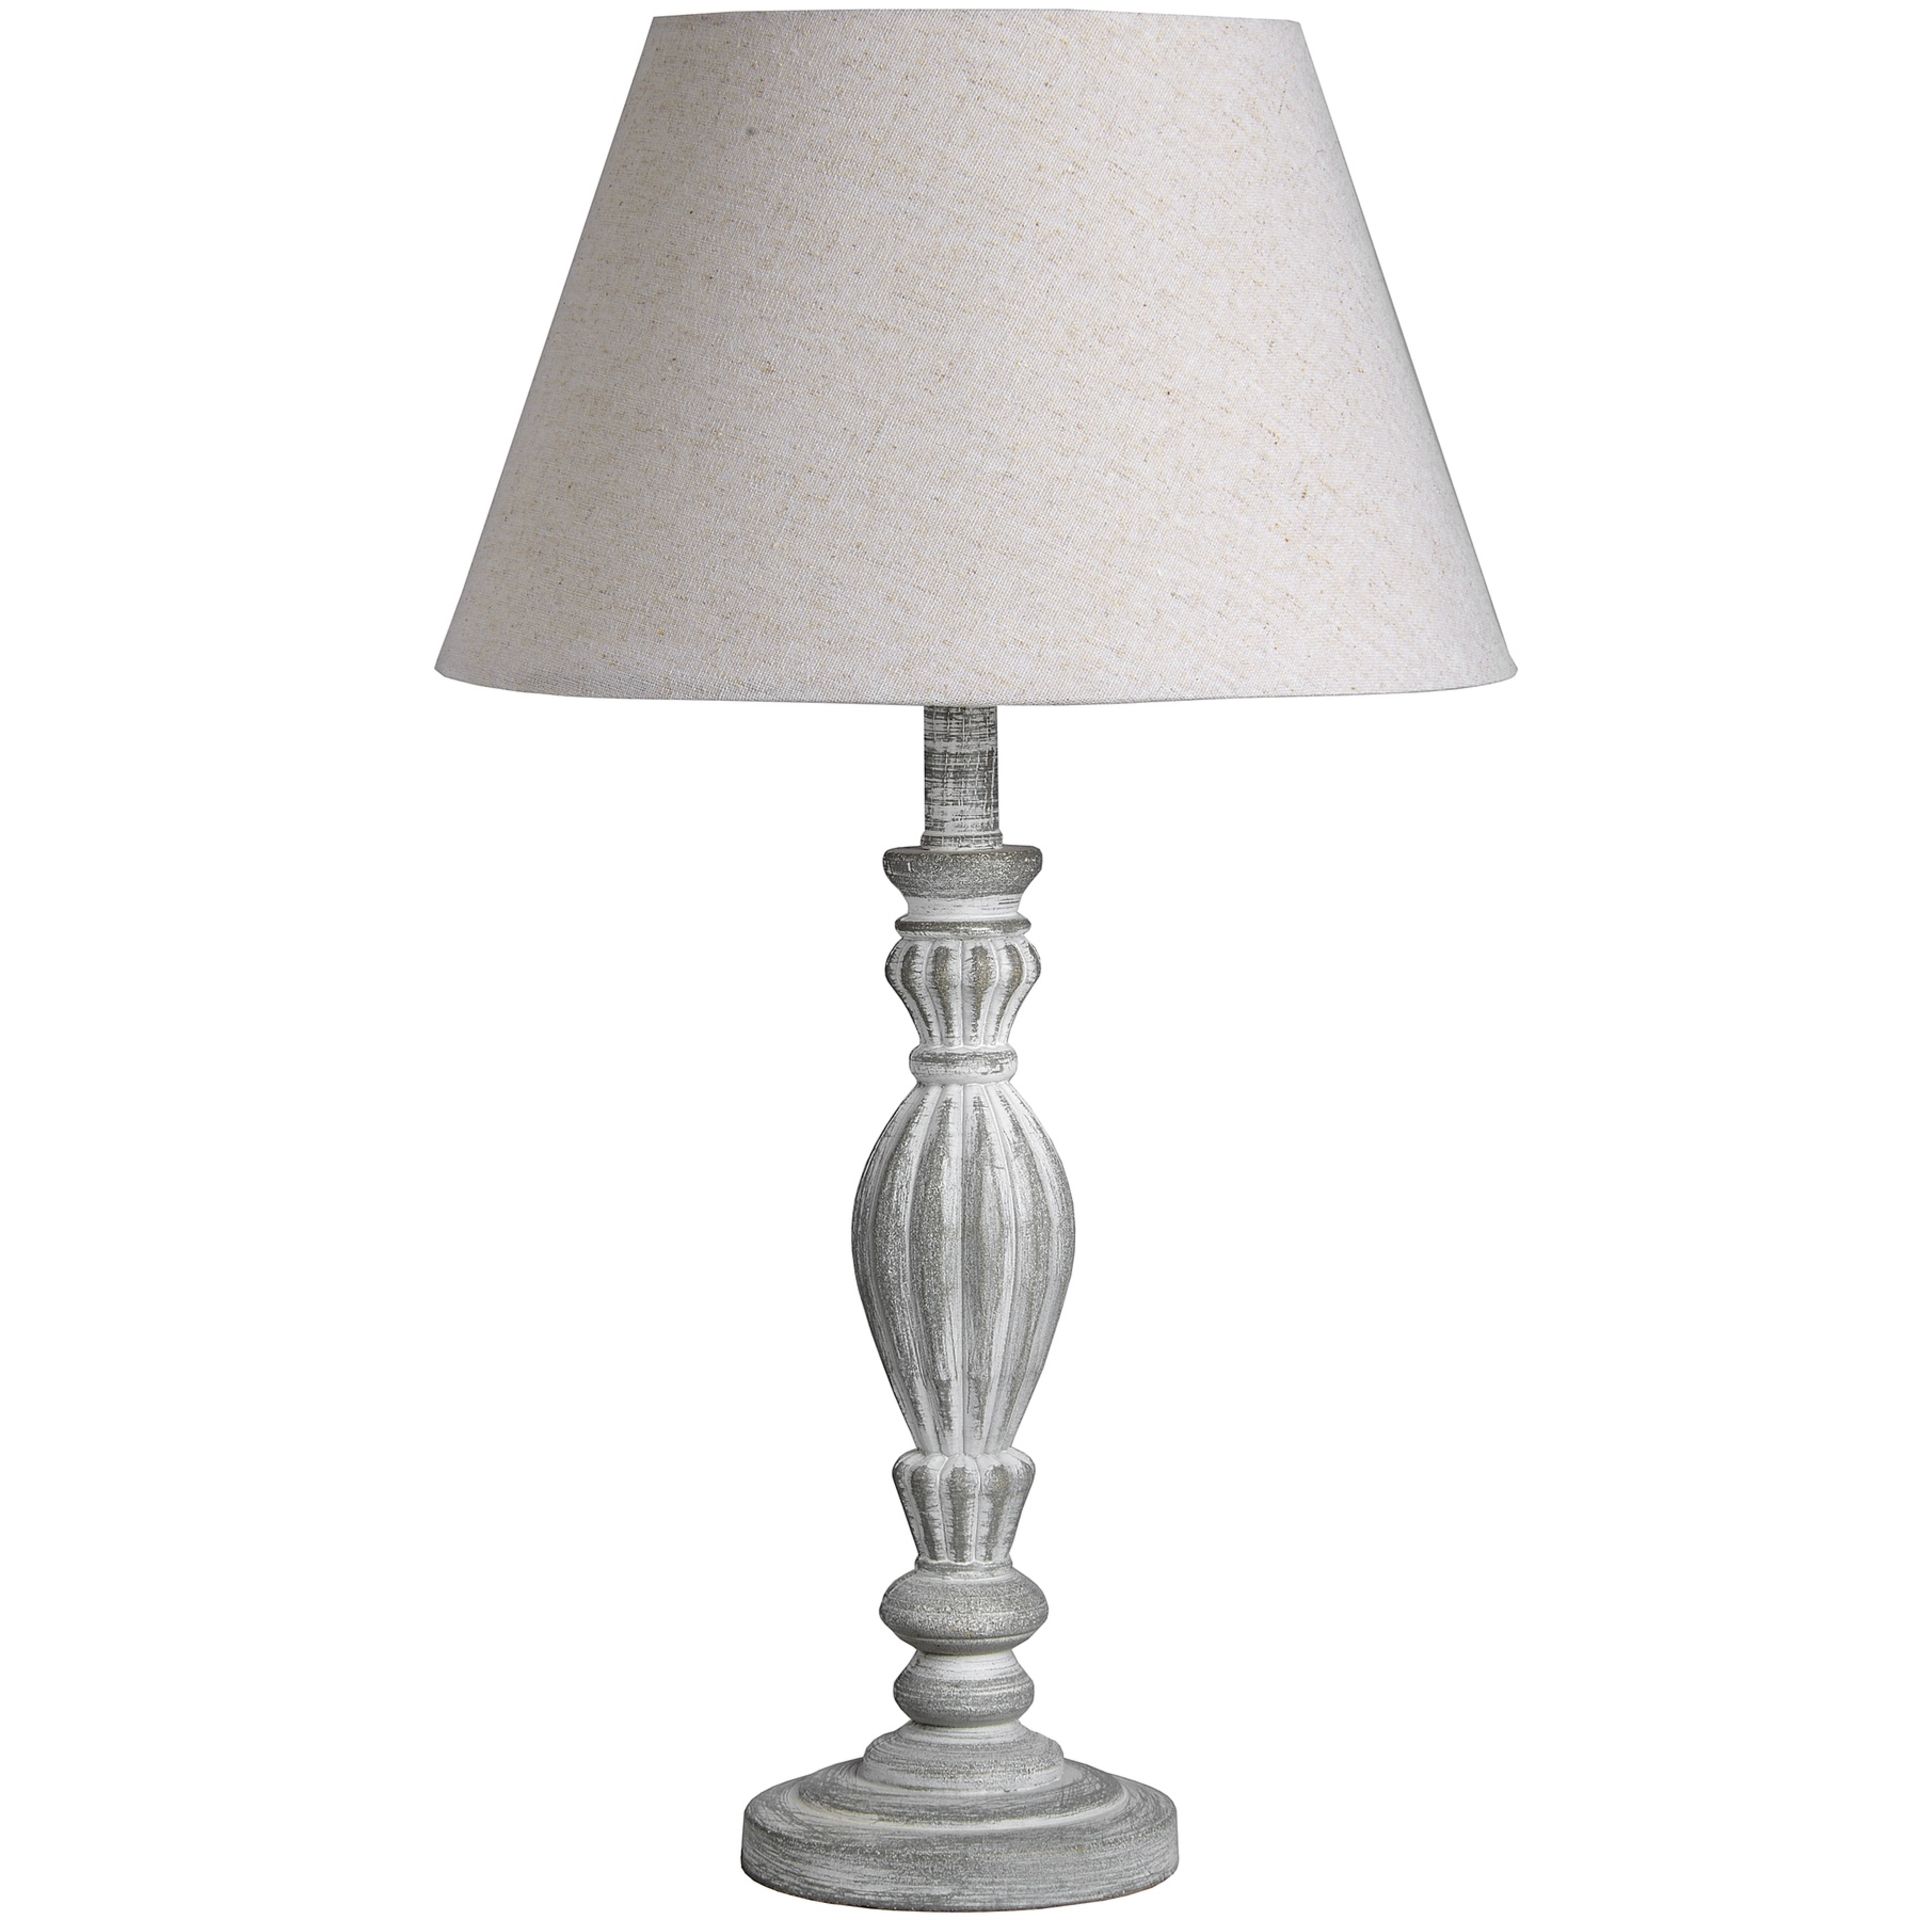 New Aegina Table Lamp With Shade 16291 - 13L x 13W x 40H